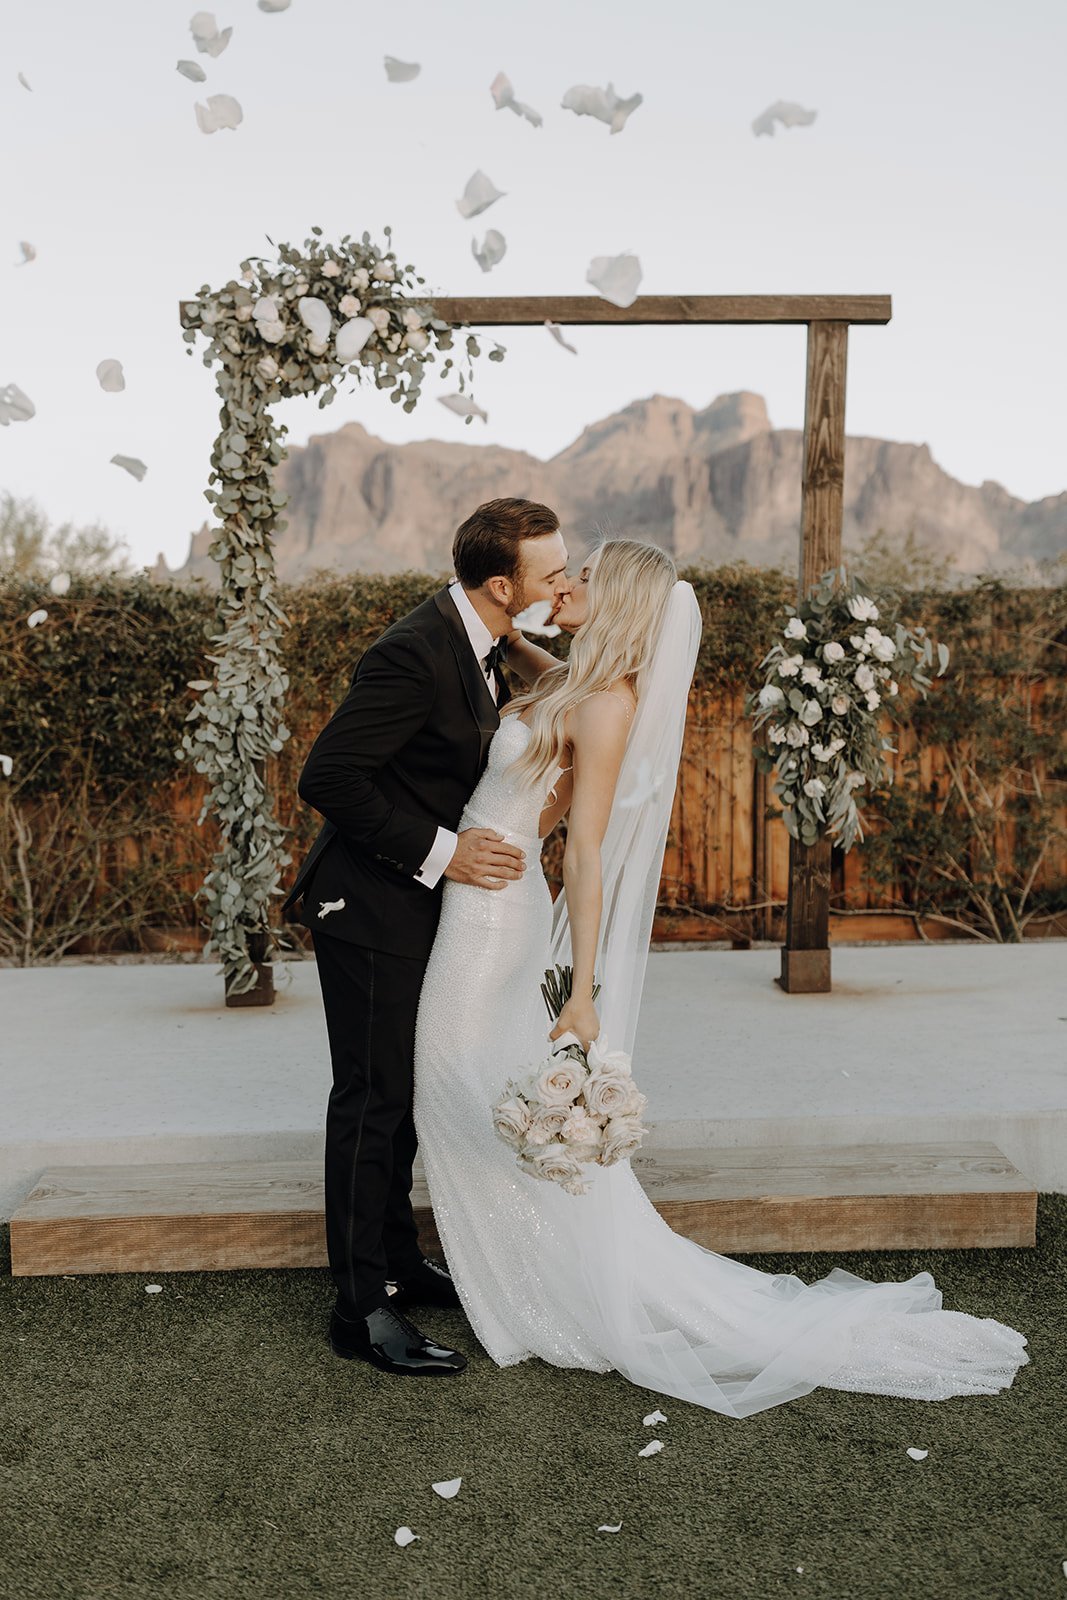 Bride and groom kissing in front of the wedding altar at their desert wedding at The Paseo wedding venue